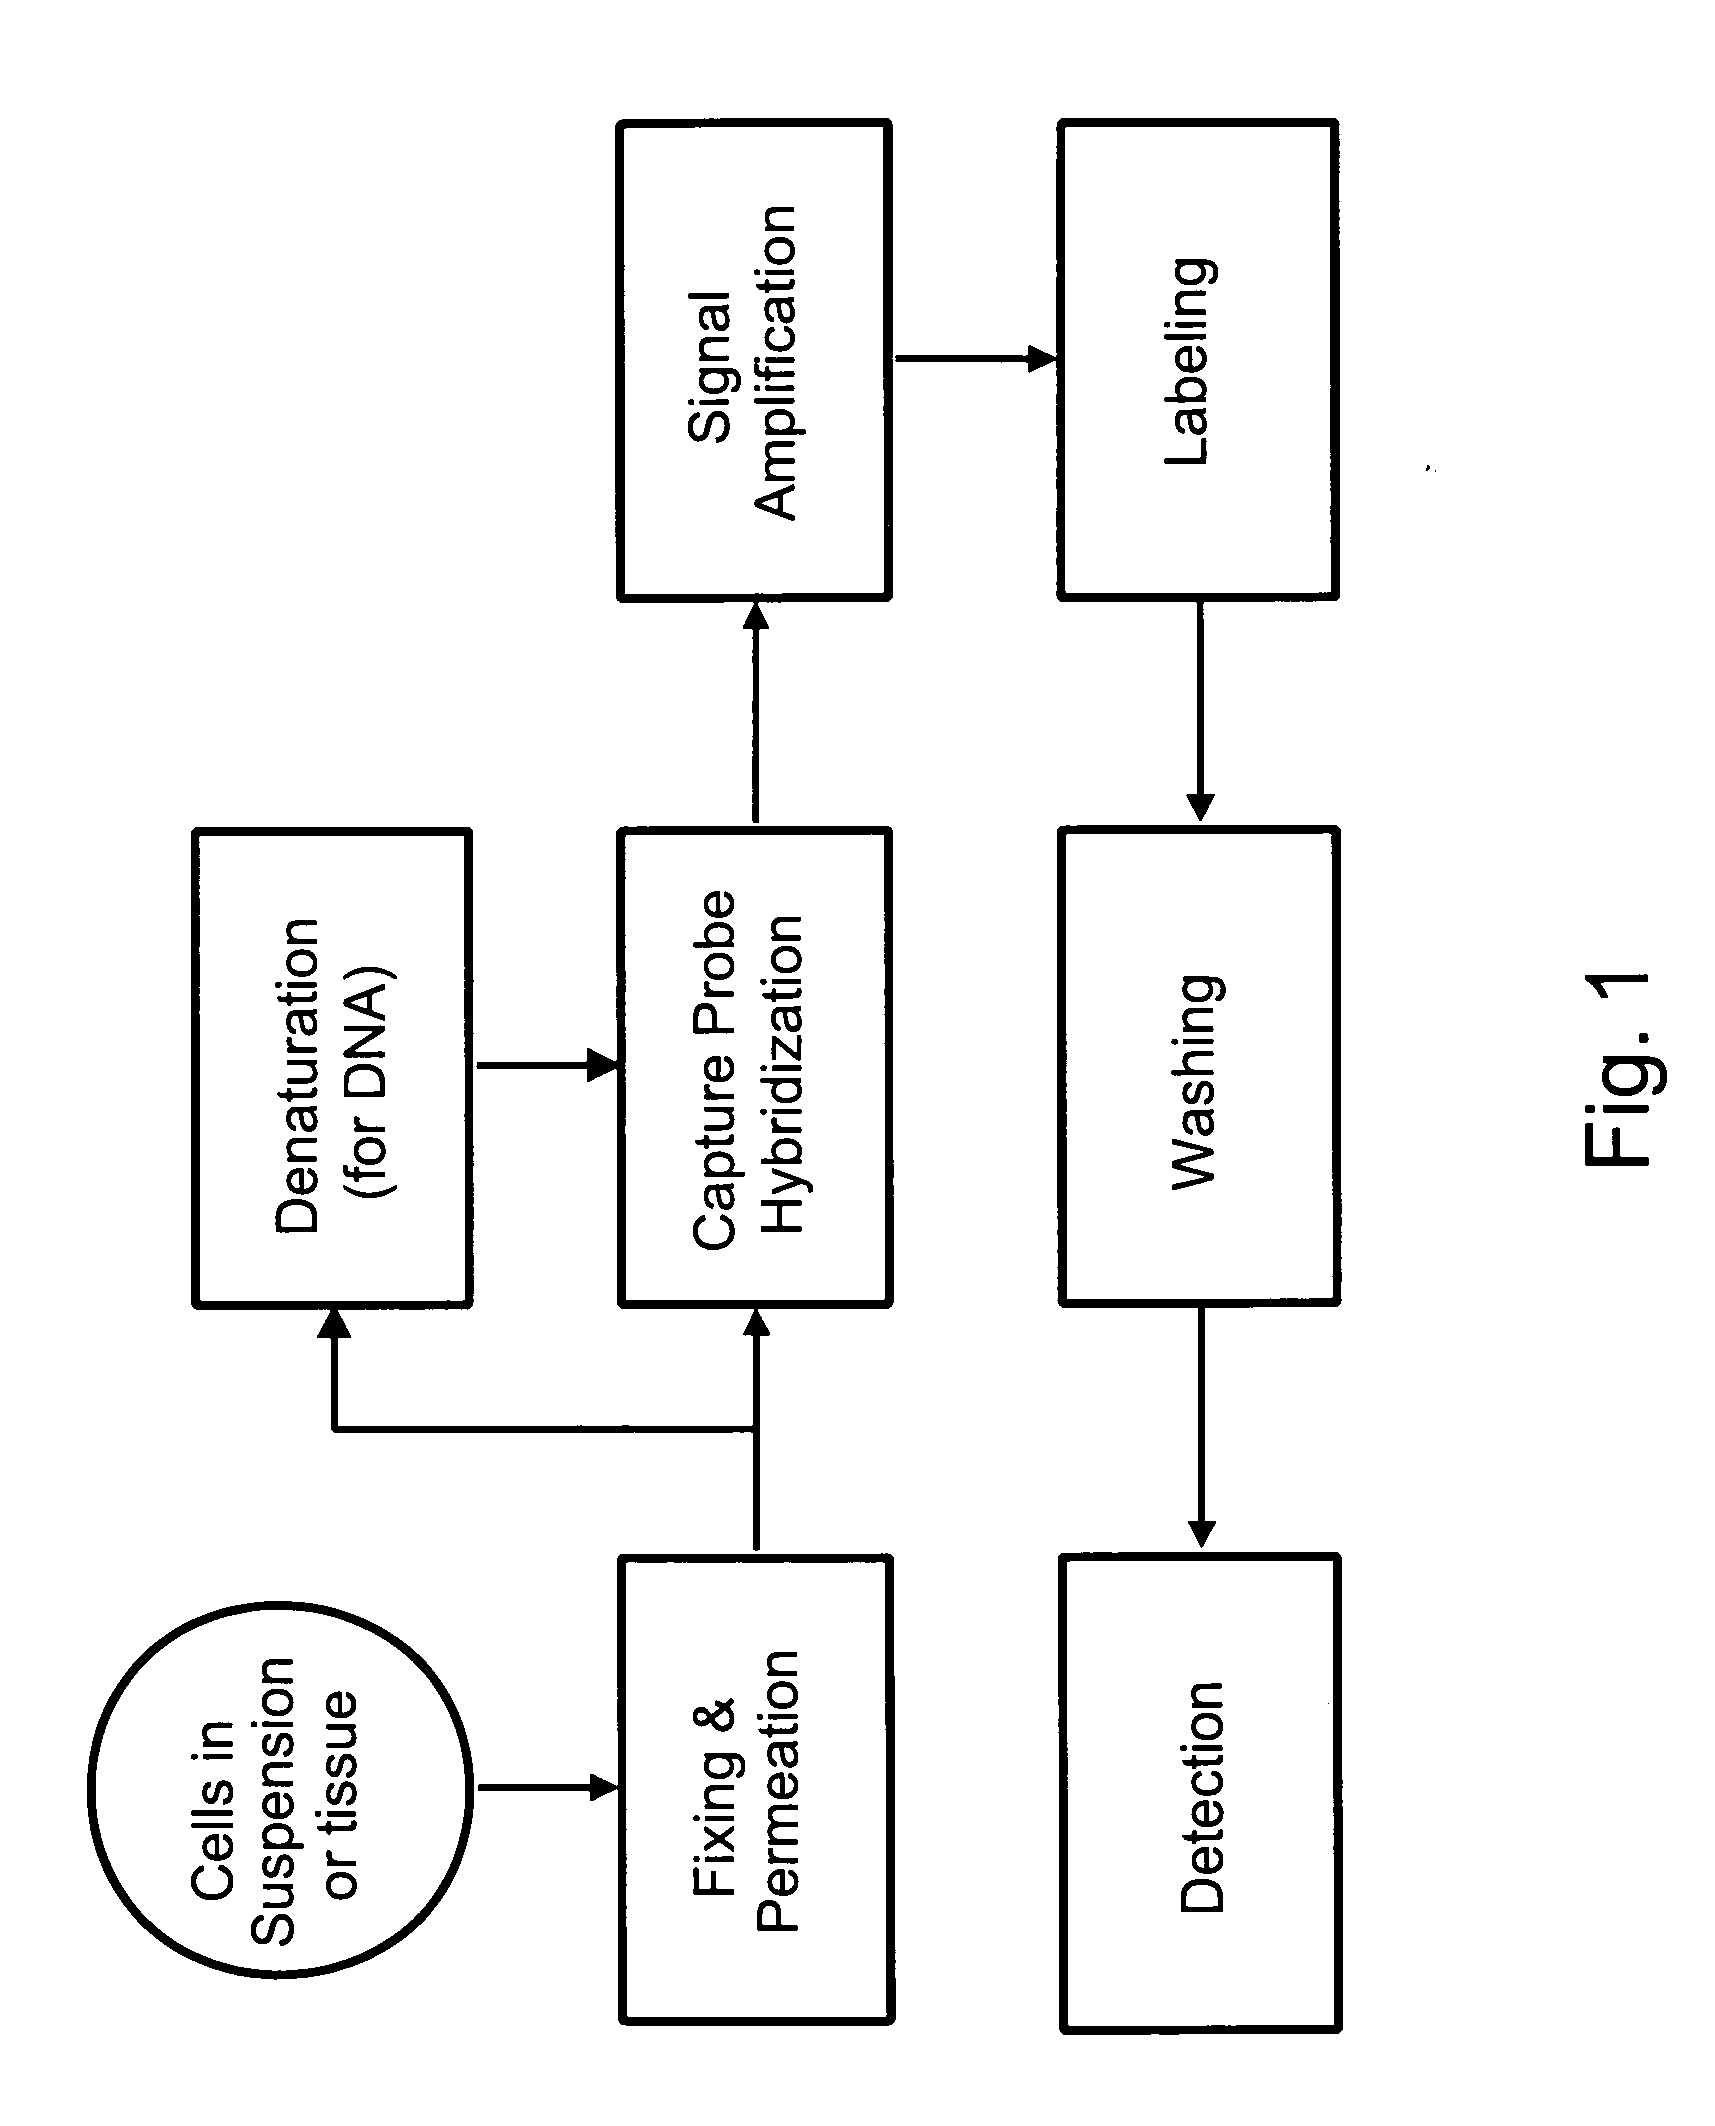 Methods of detecting nucleic acids in individual cells and of identifying rare cells from large heterogeneous cell populations